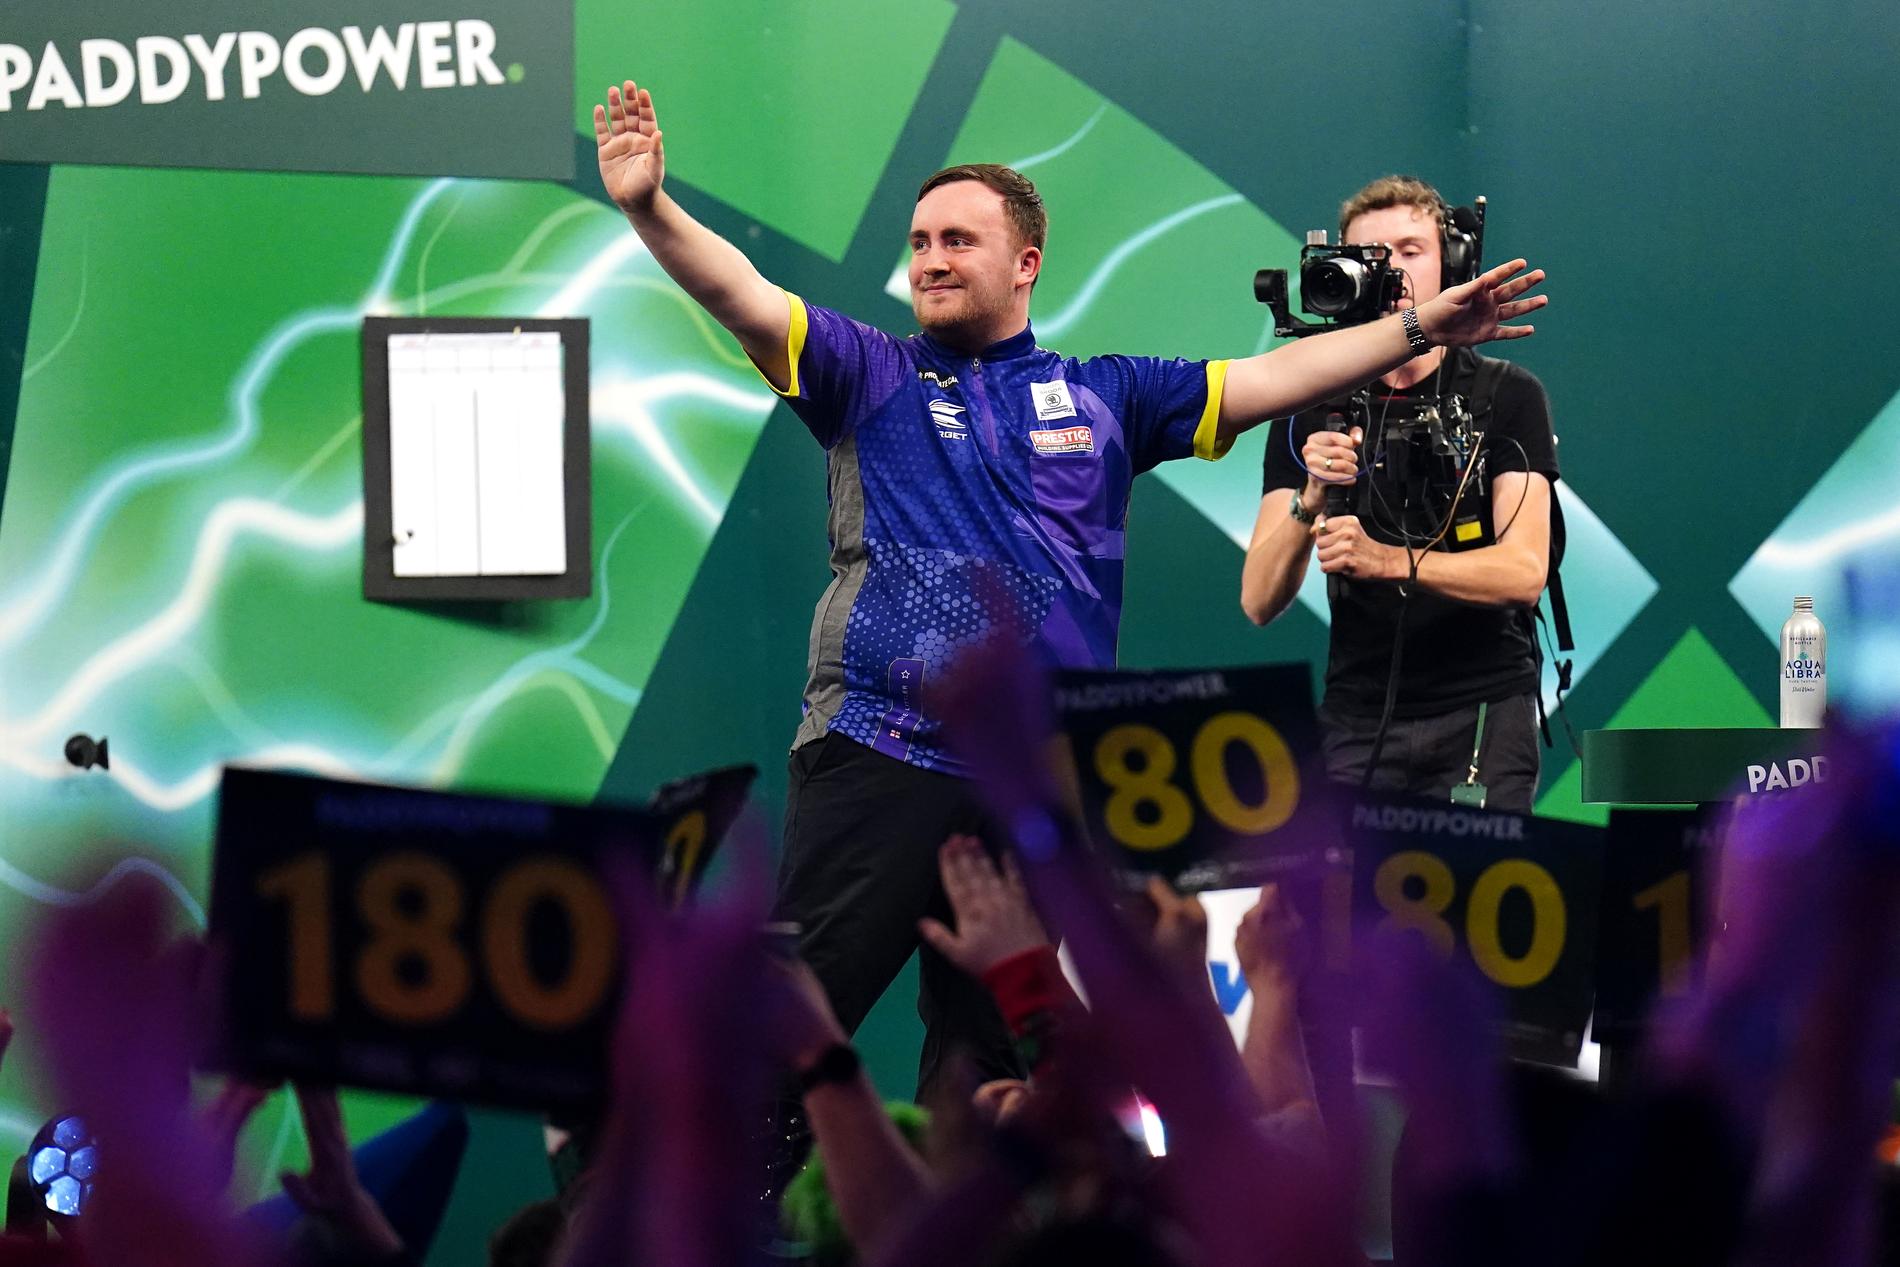 Luke Littler (16) takes England by storm into the quarter-finals of the World Darts Championship